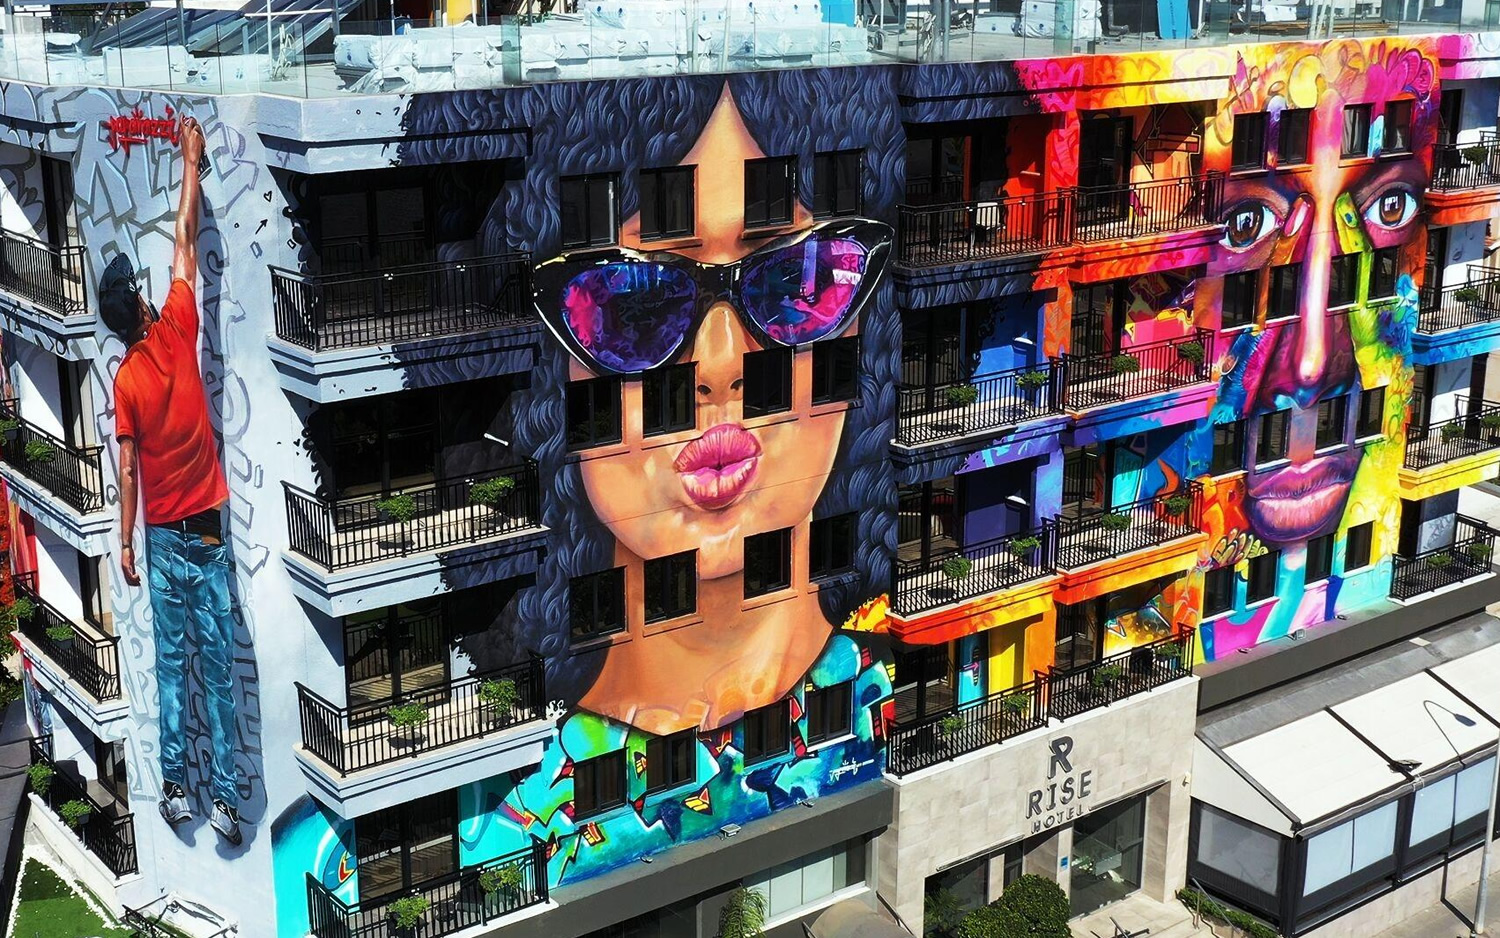 Cyprus gets its very own graffiti hotel in Larnaca!